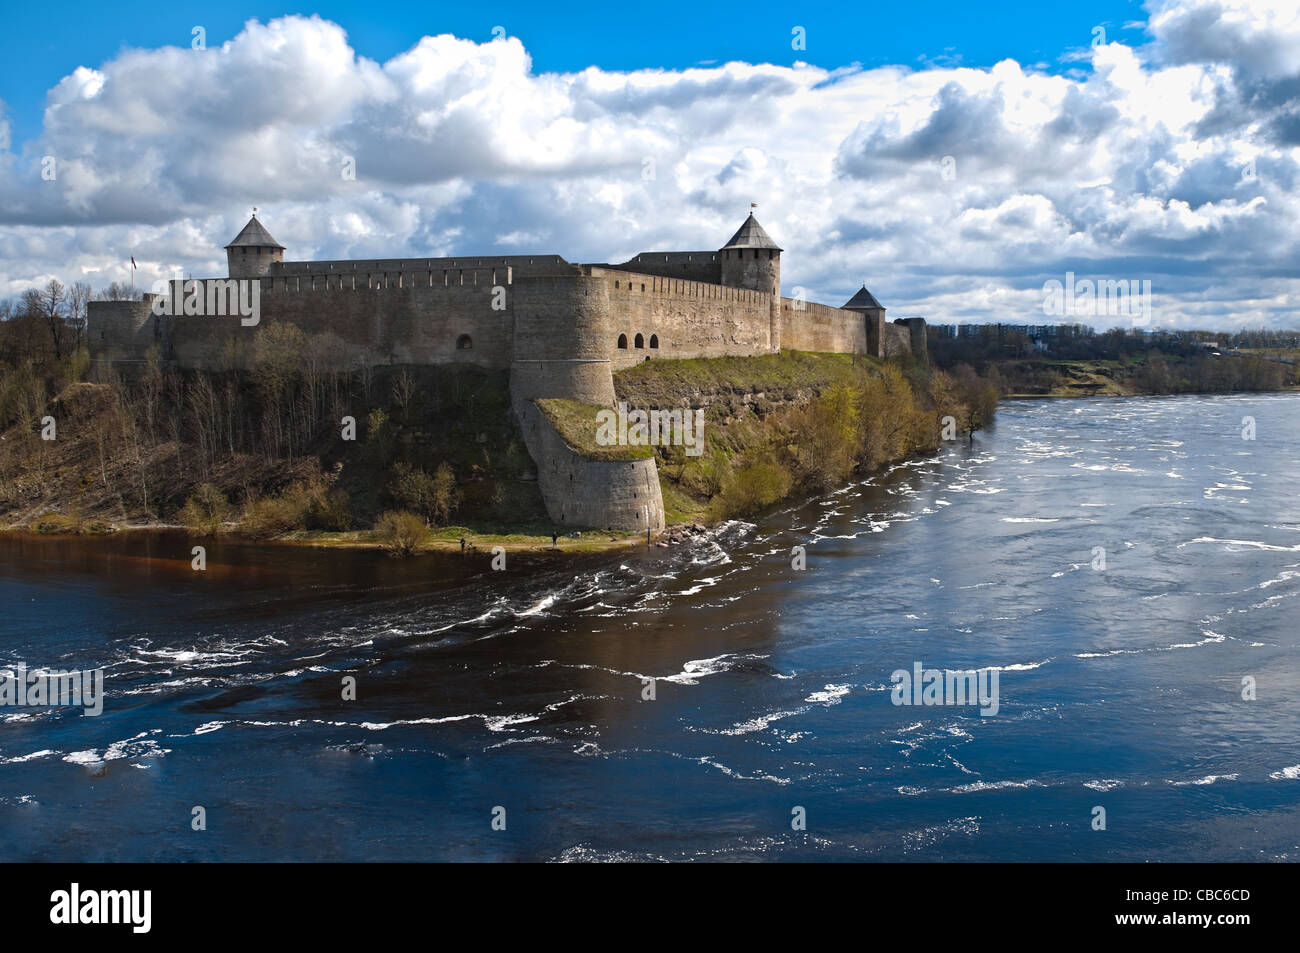 russian fortress of Ivangorod with river in foreground and blue cloudy sky in background Stock Photo